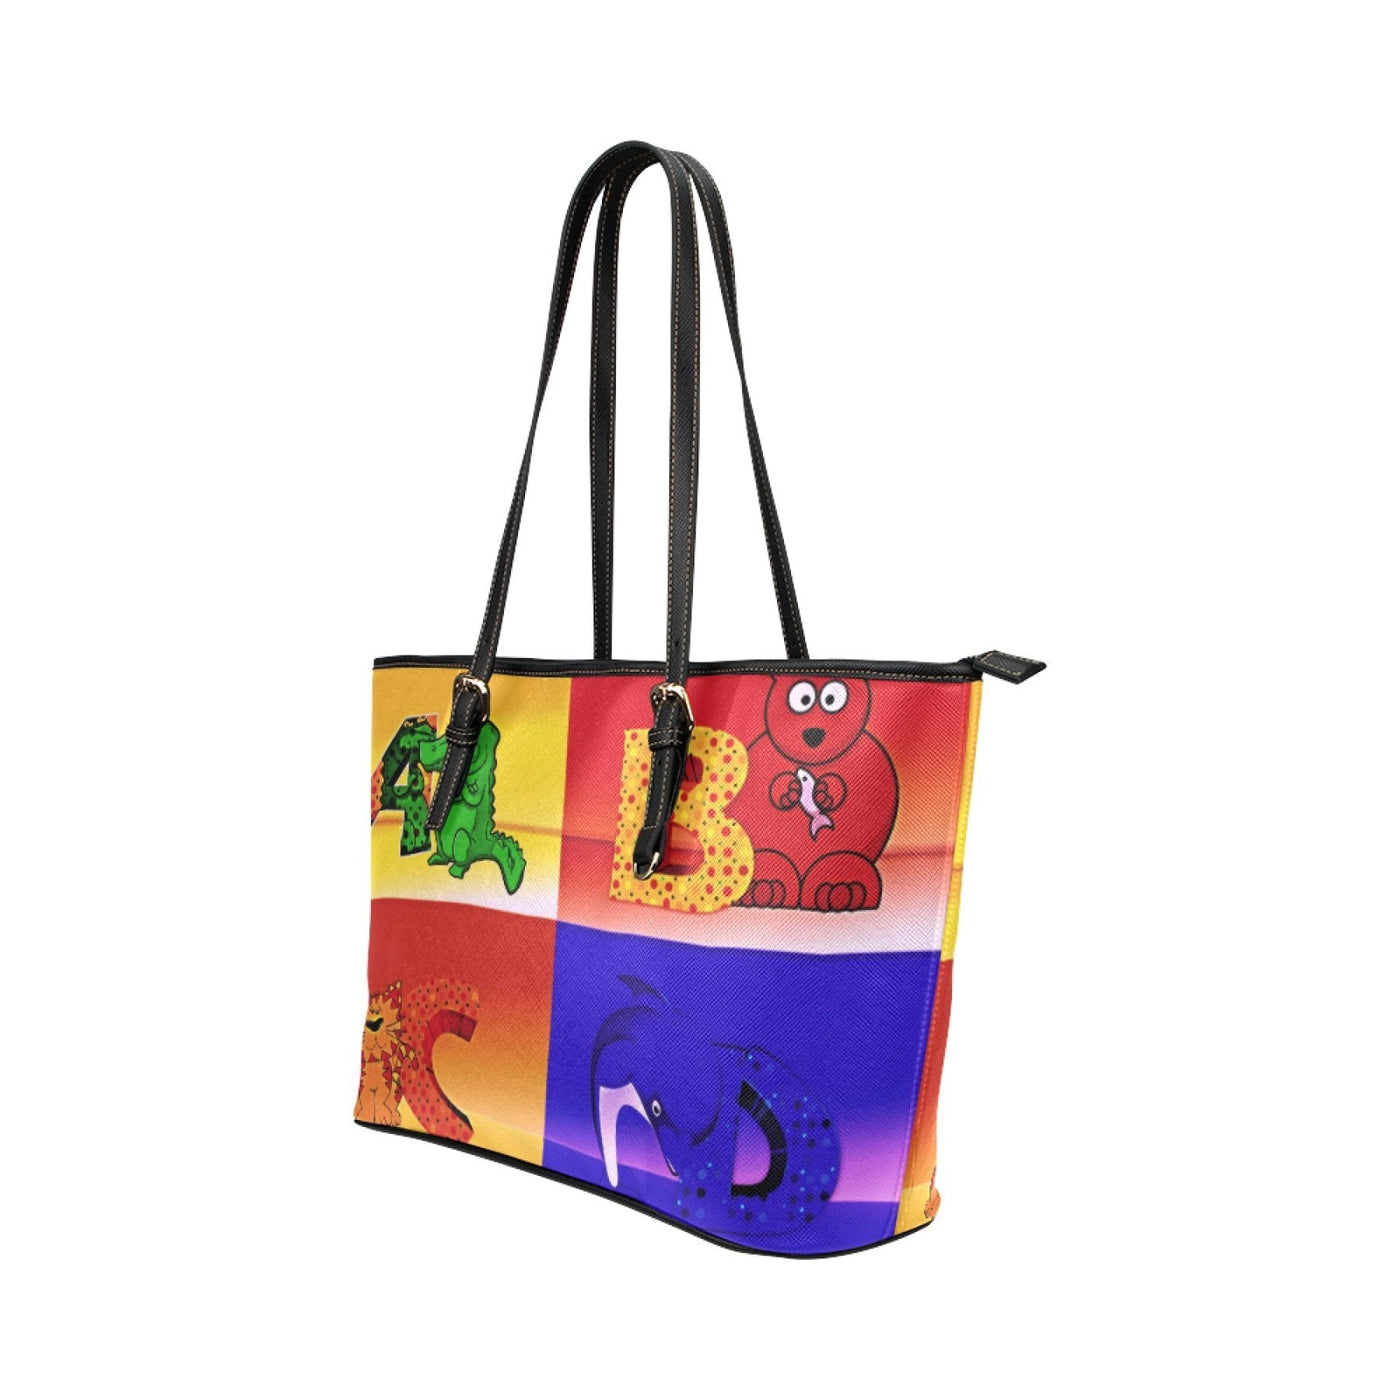 Large Leather Tote Shoulder Bag - Abcd Multicolor Illustration - Bags | Leather